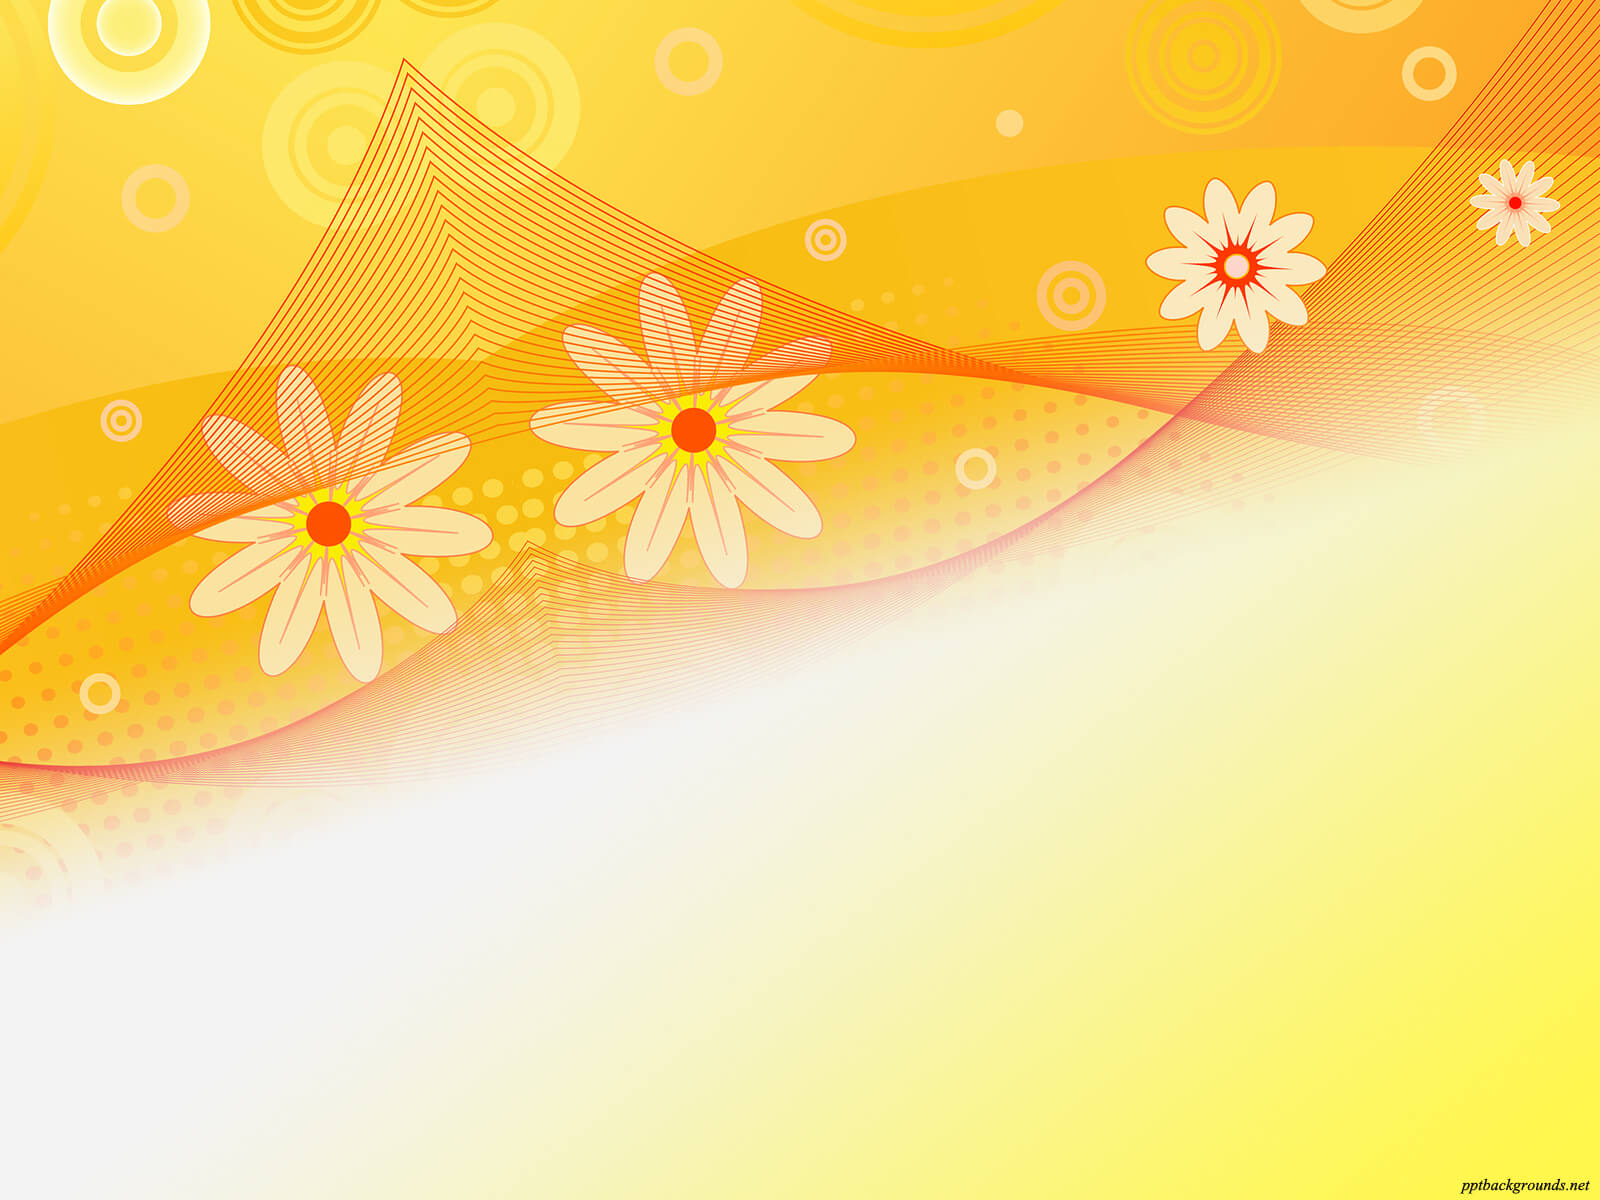 Sunflower Abstract Beauty Backgrounds For Powerpoint Regarding Pretty Powerpoint Templates